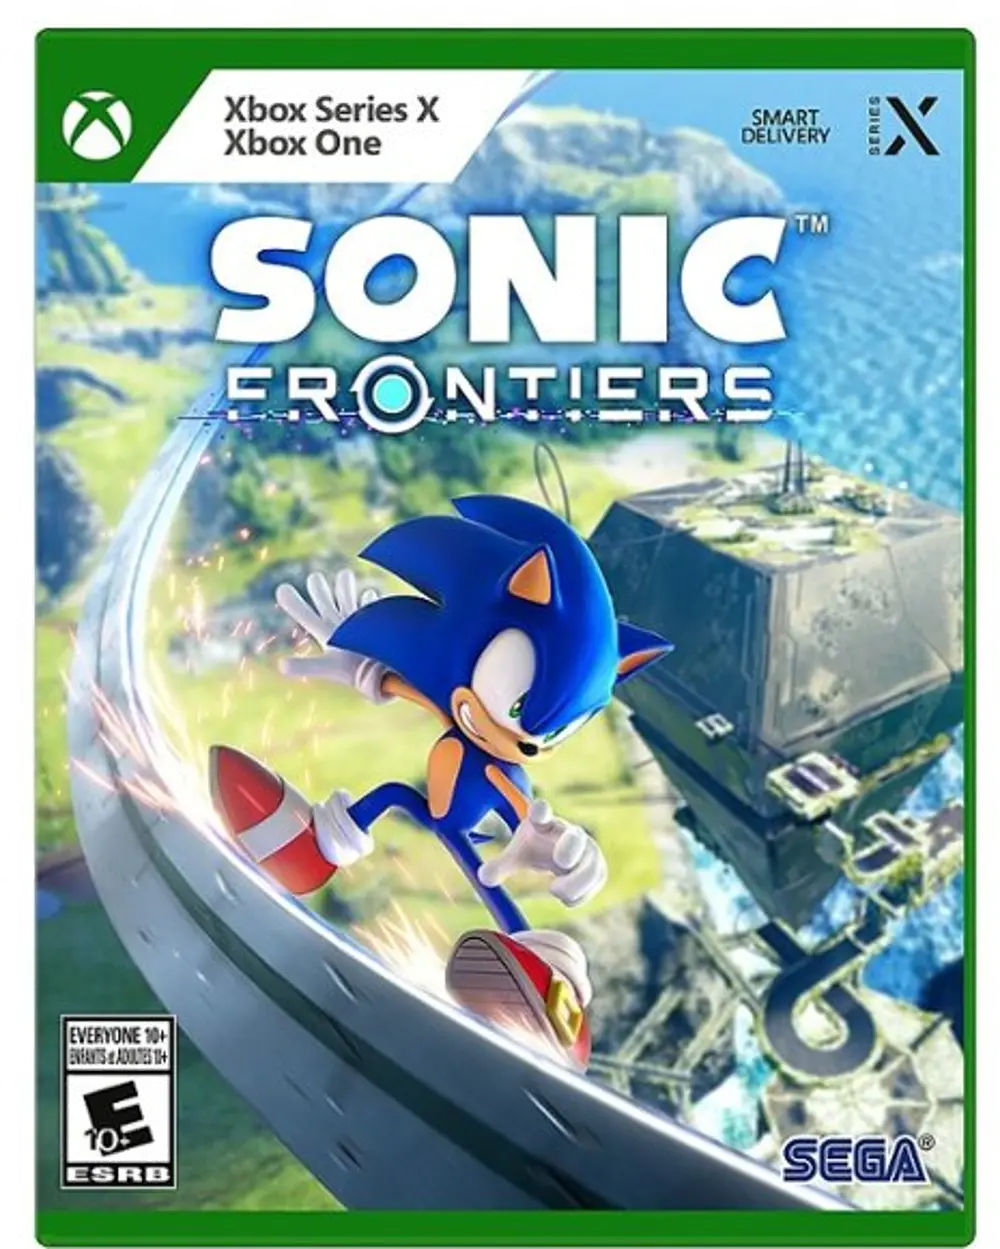 XBSX/SONIC_FRONTIERS Sonic Frontiers - Xbox Series X-1